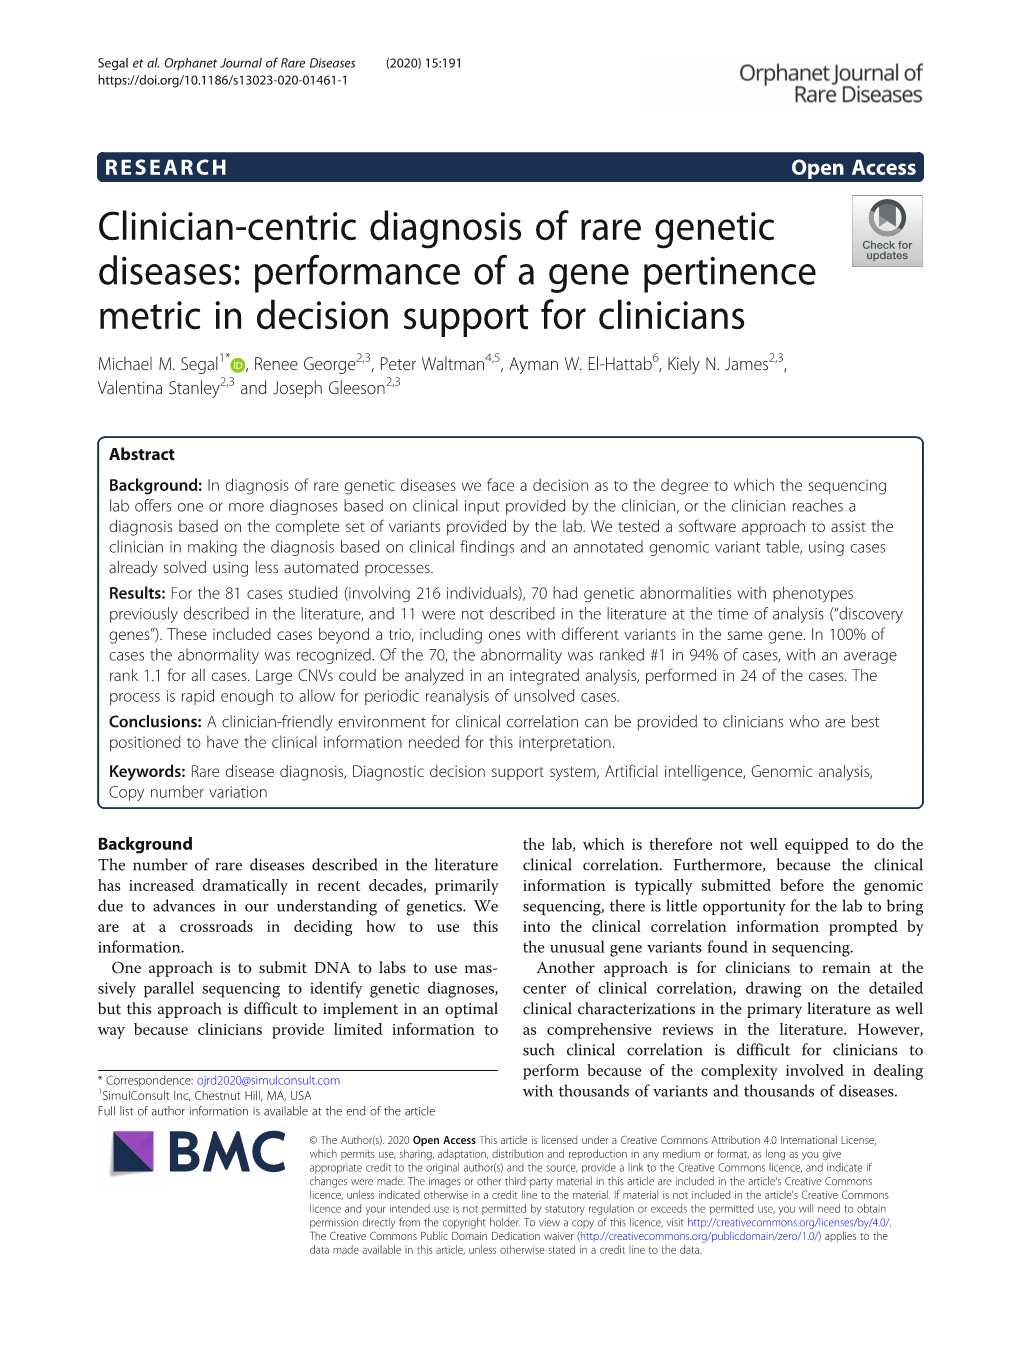 Clinician-Centric Diagnosis of Rare Genetic Diseases: Performance of a Gene Pertinence Metric in Decision Support for Clinicians Michael M